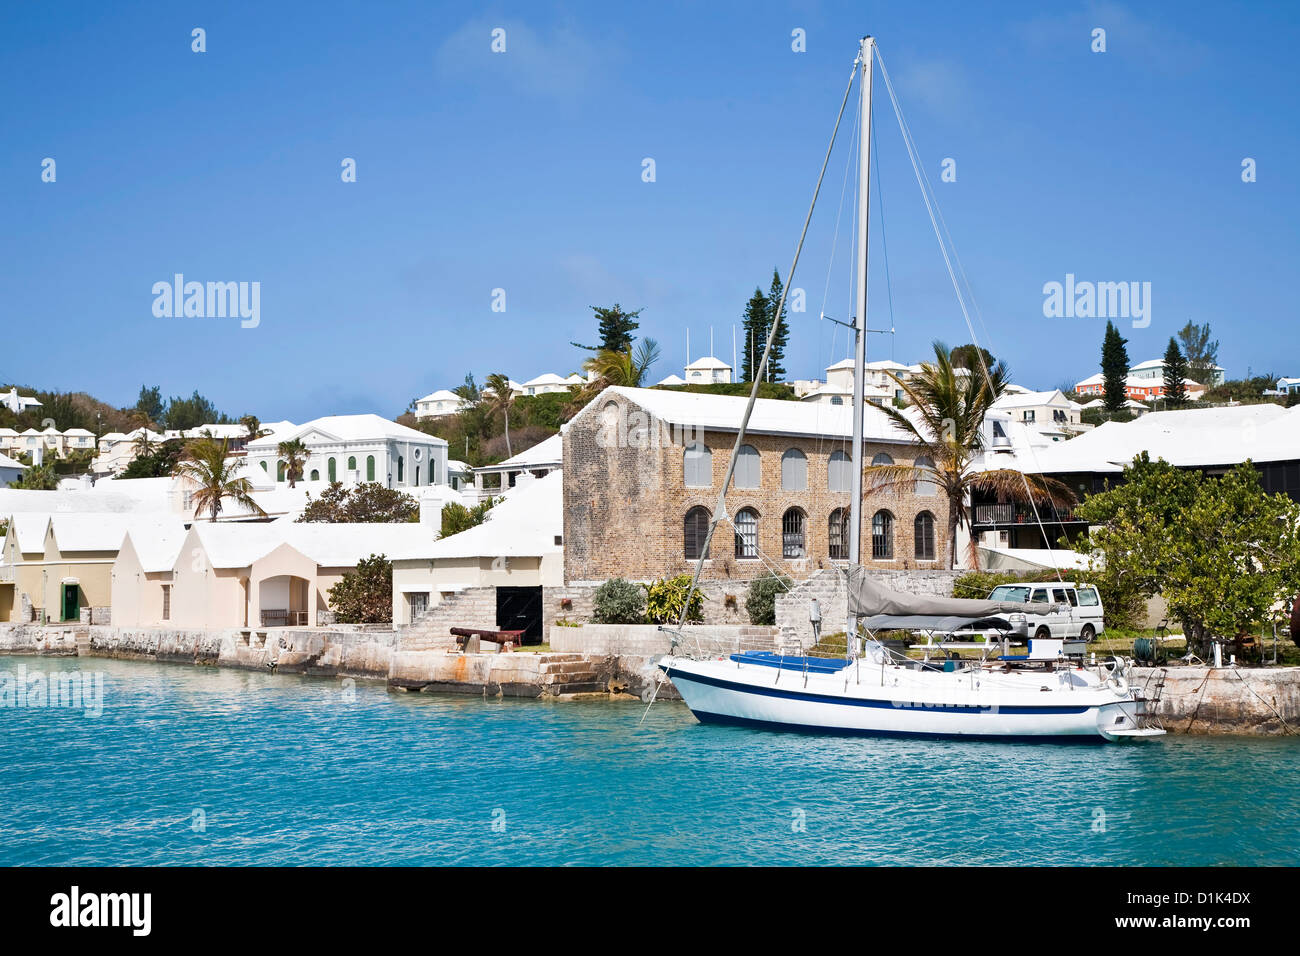 Sailing ship along the waterfront of the town of St. George's, Bermuda. Stock Photo